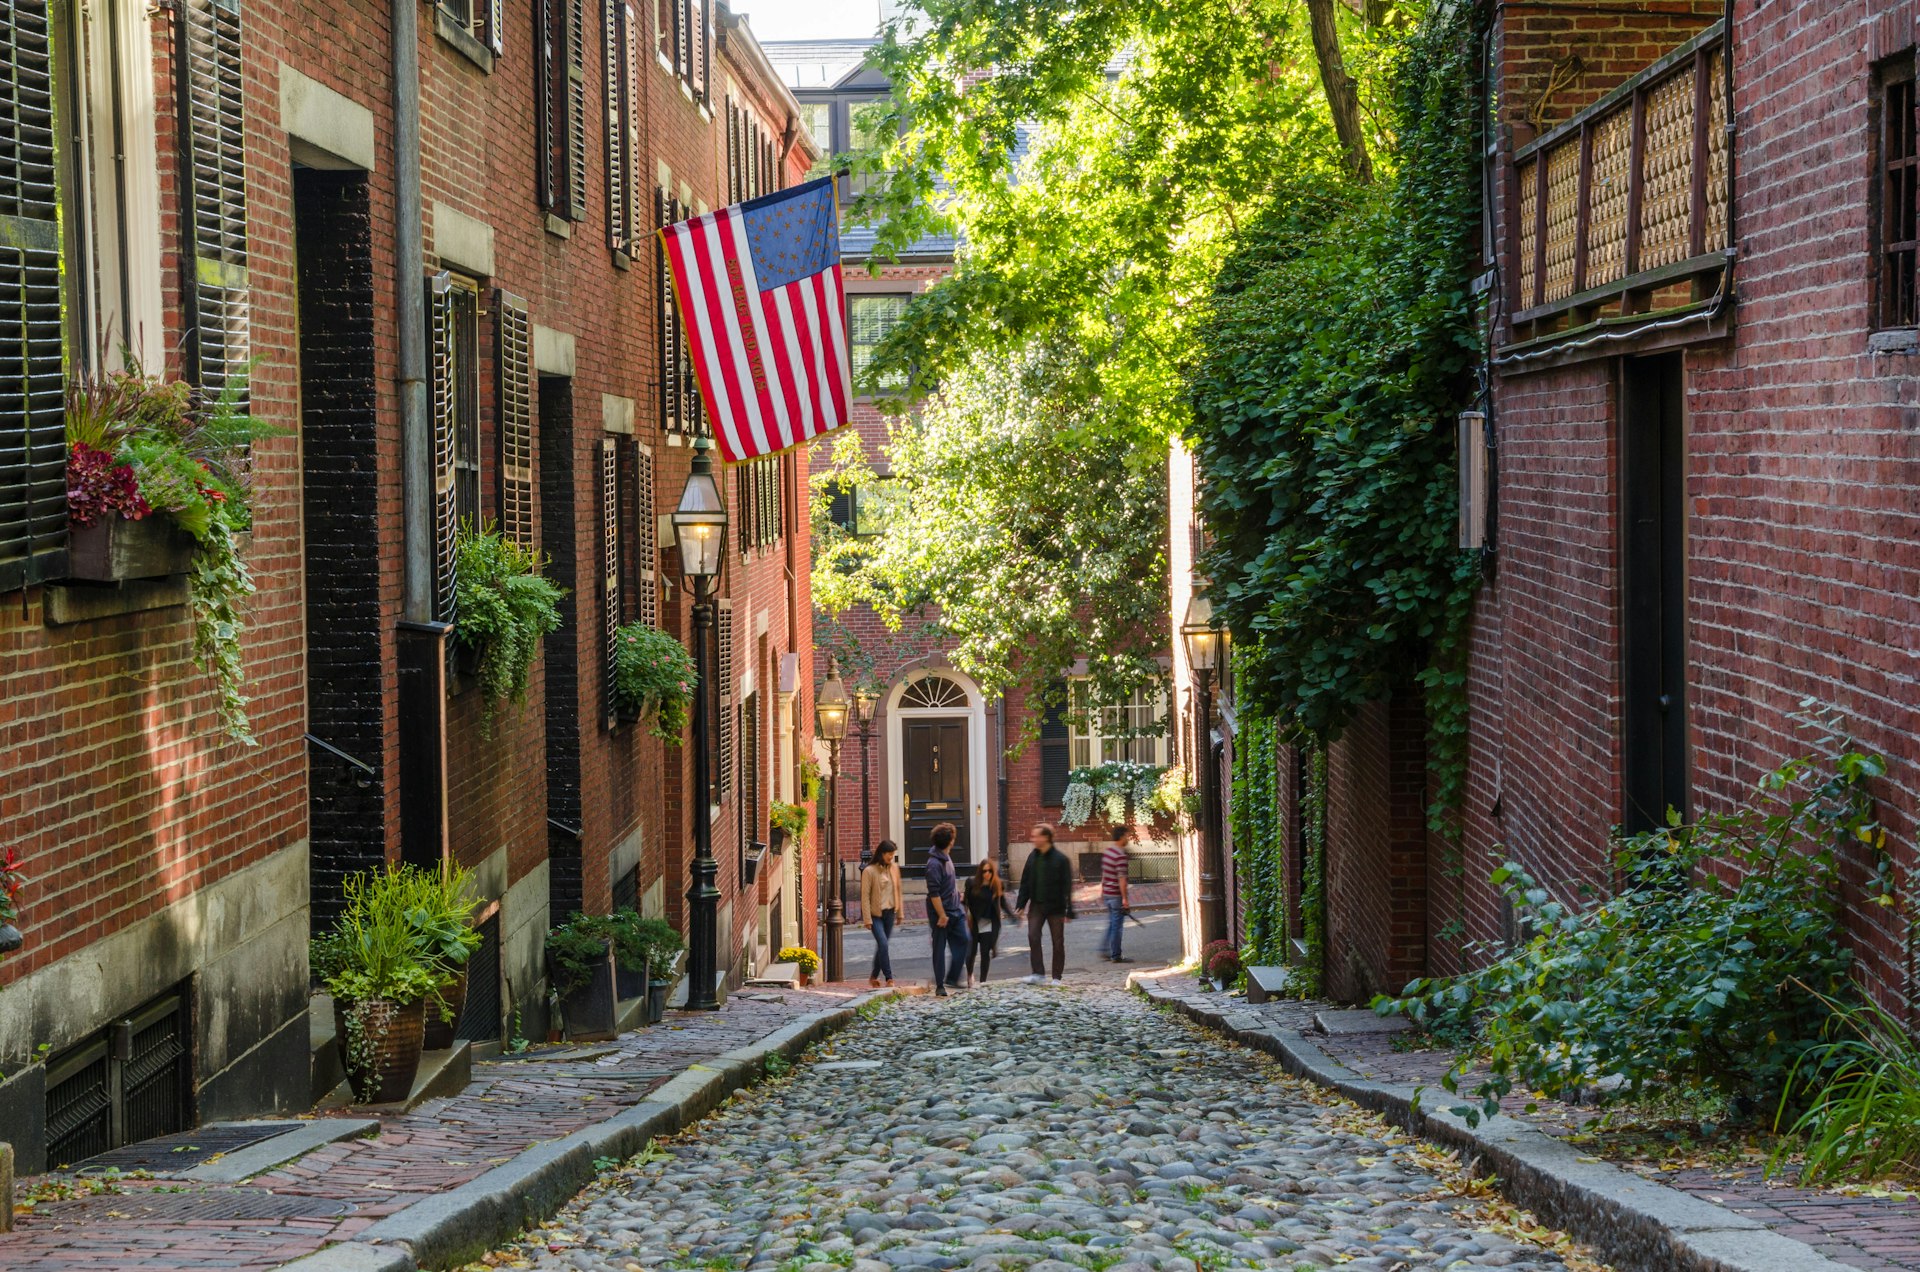  Tourists wandering along Acorn Street in Beacon Hill on a warm autumn day